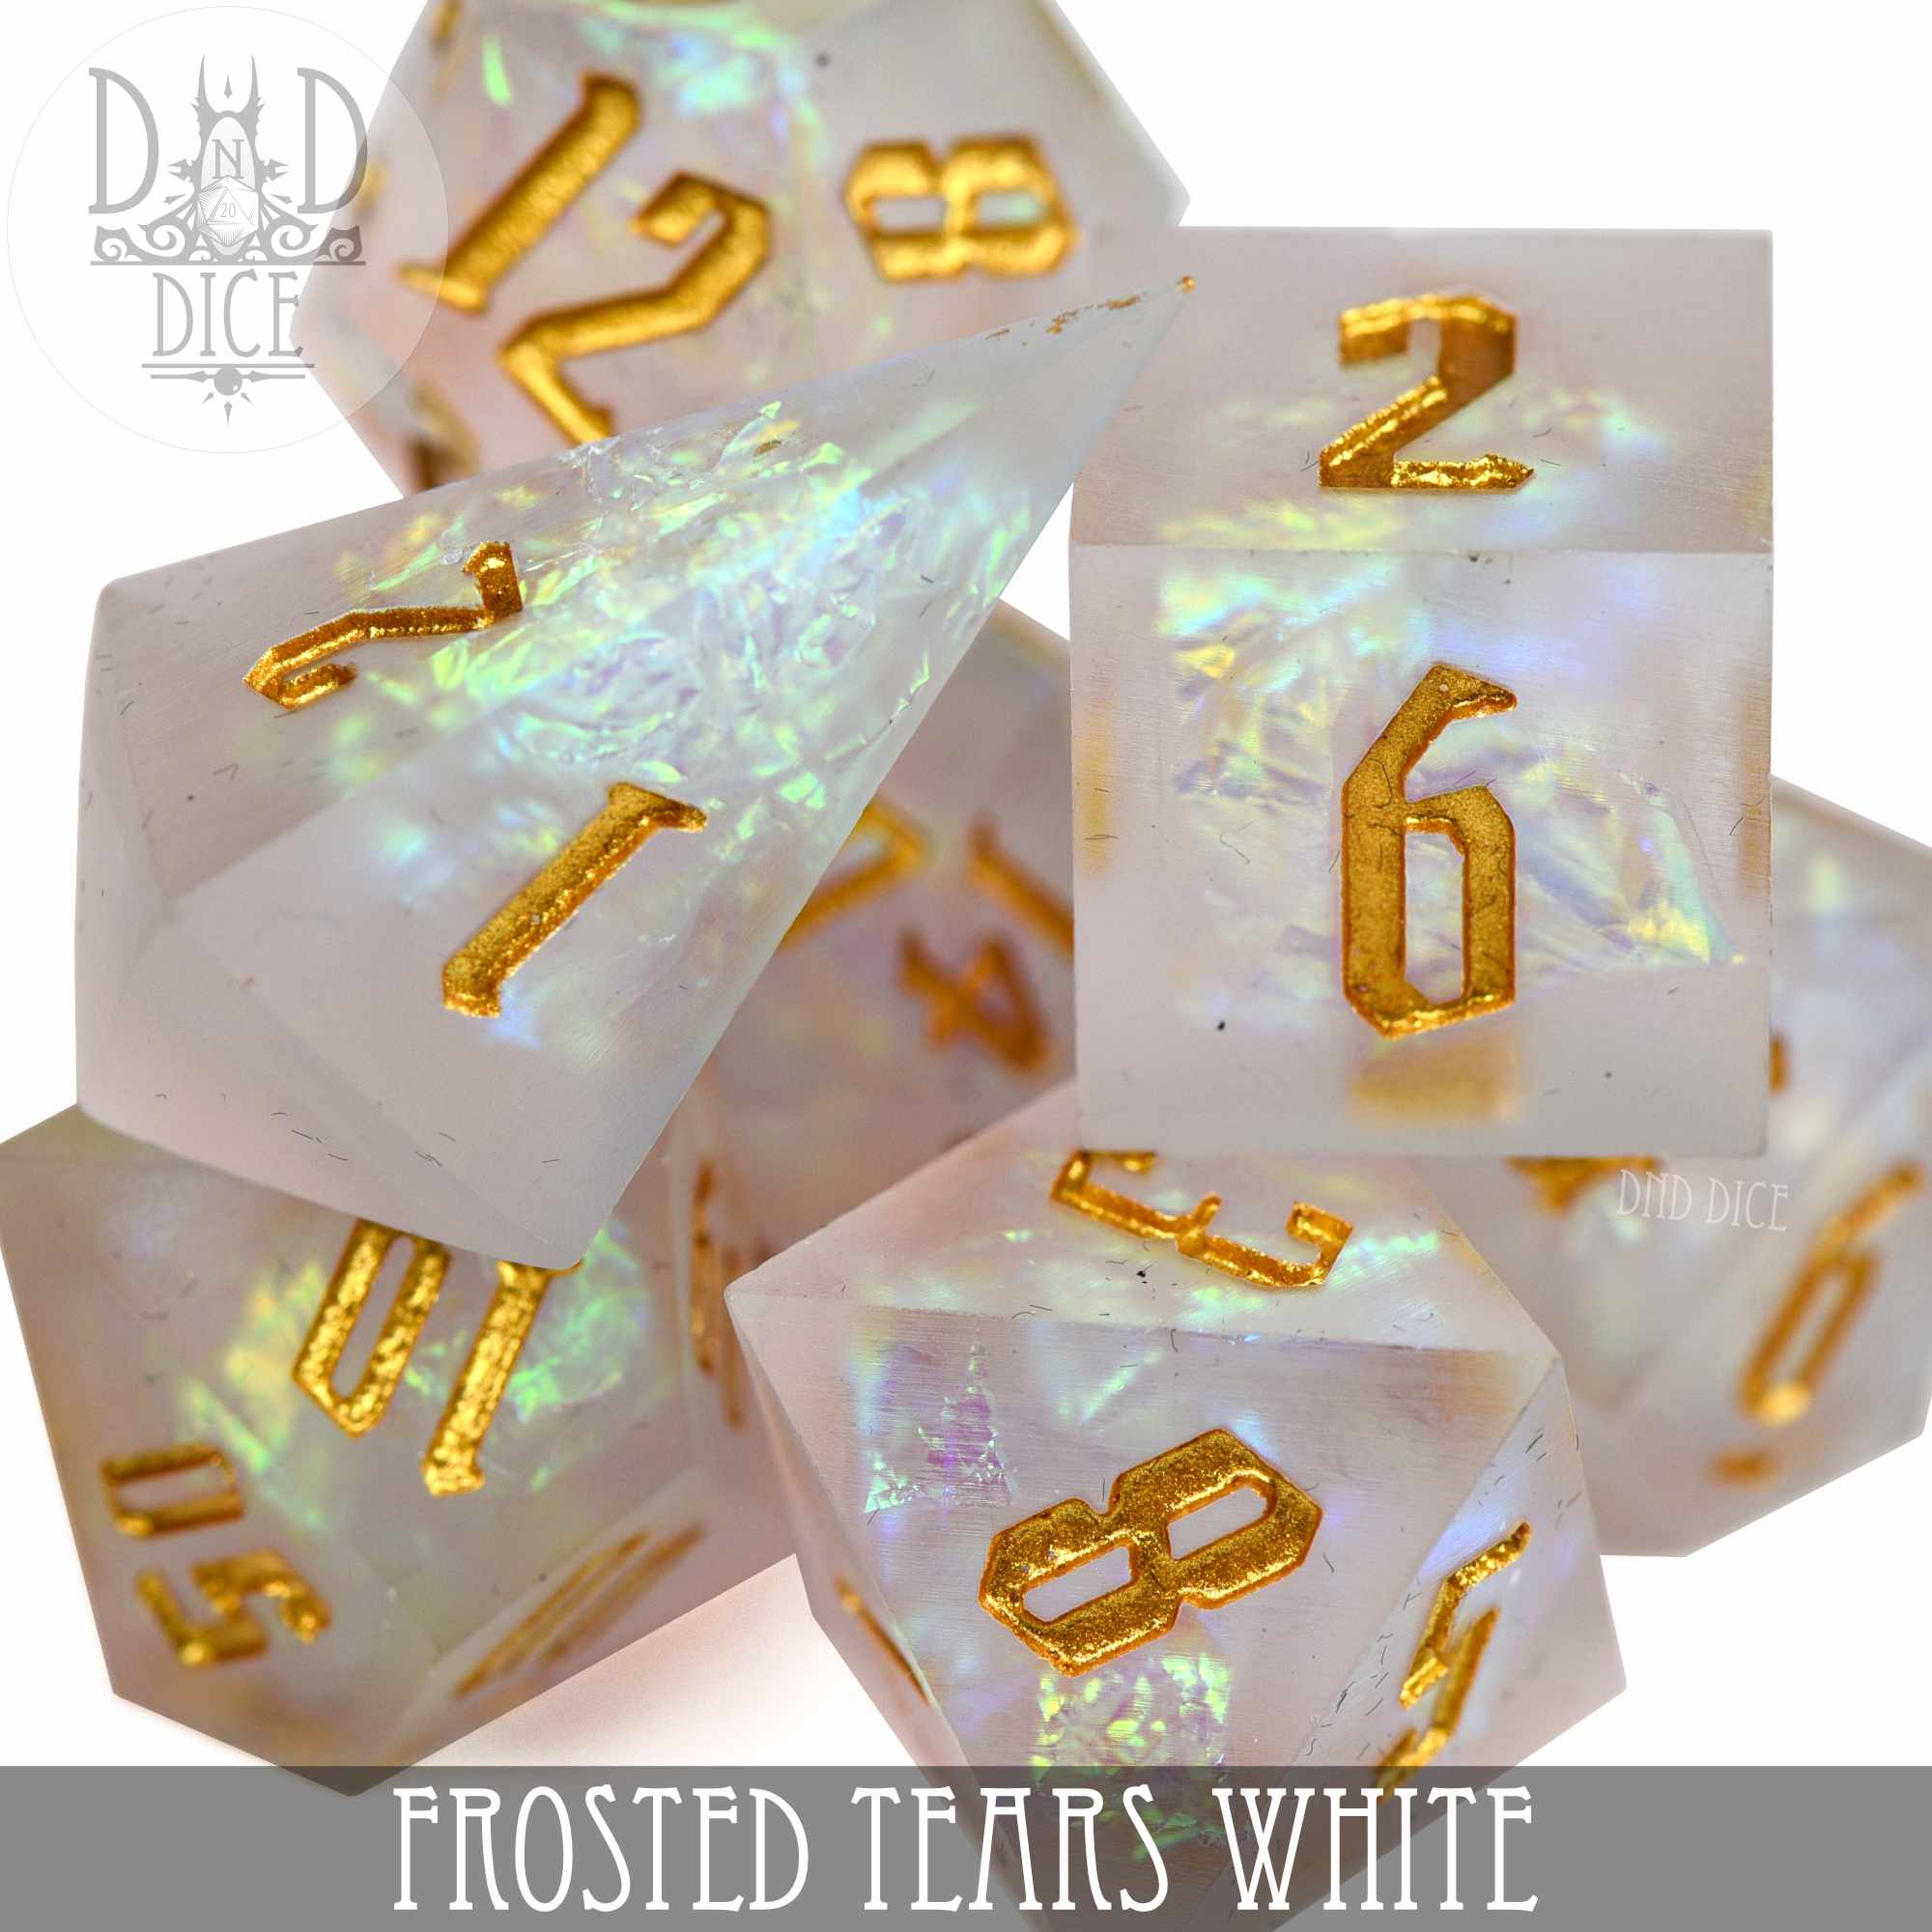 Frosted Tears White Handmade Dice Set